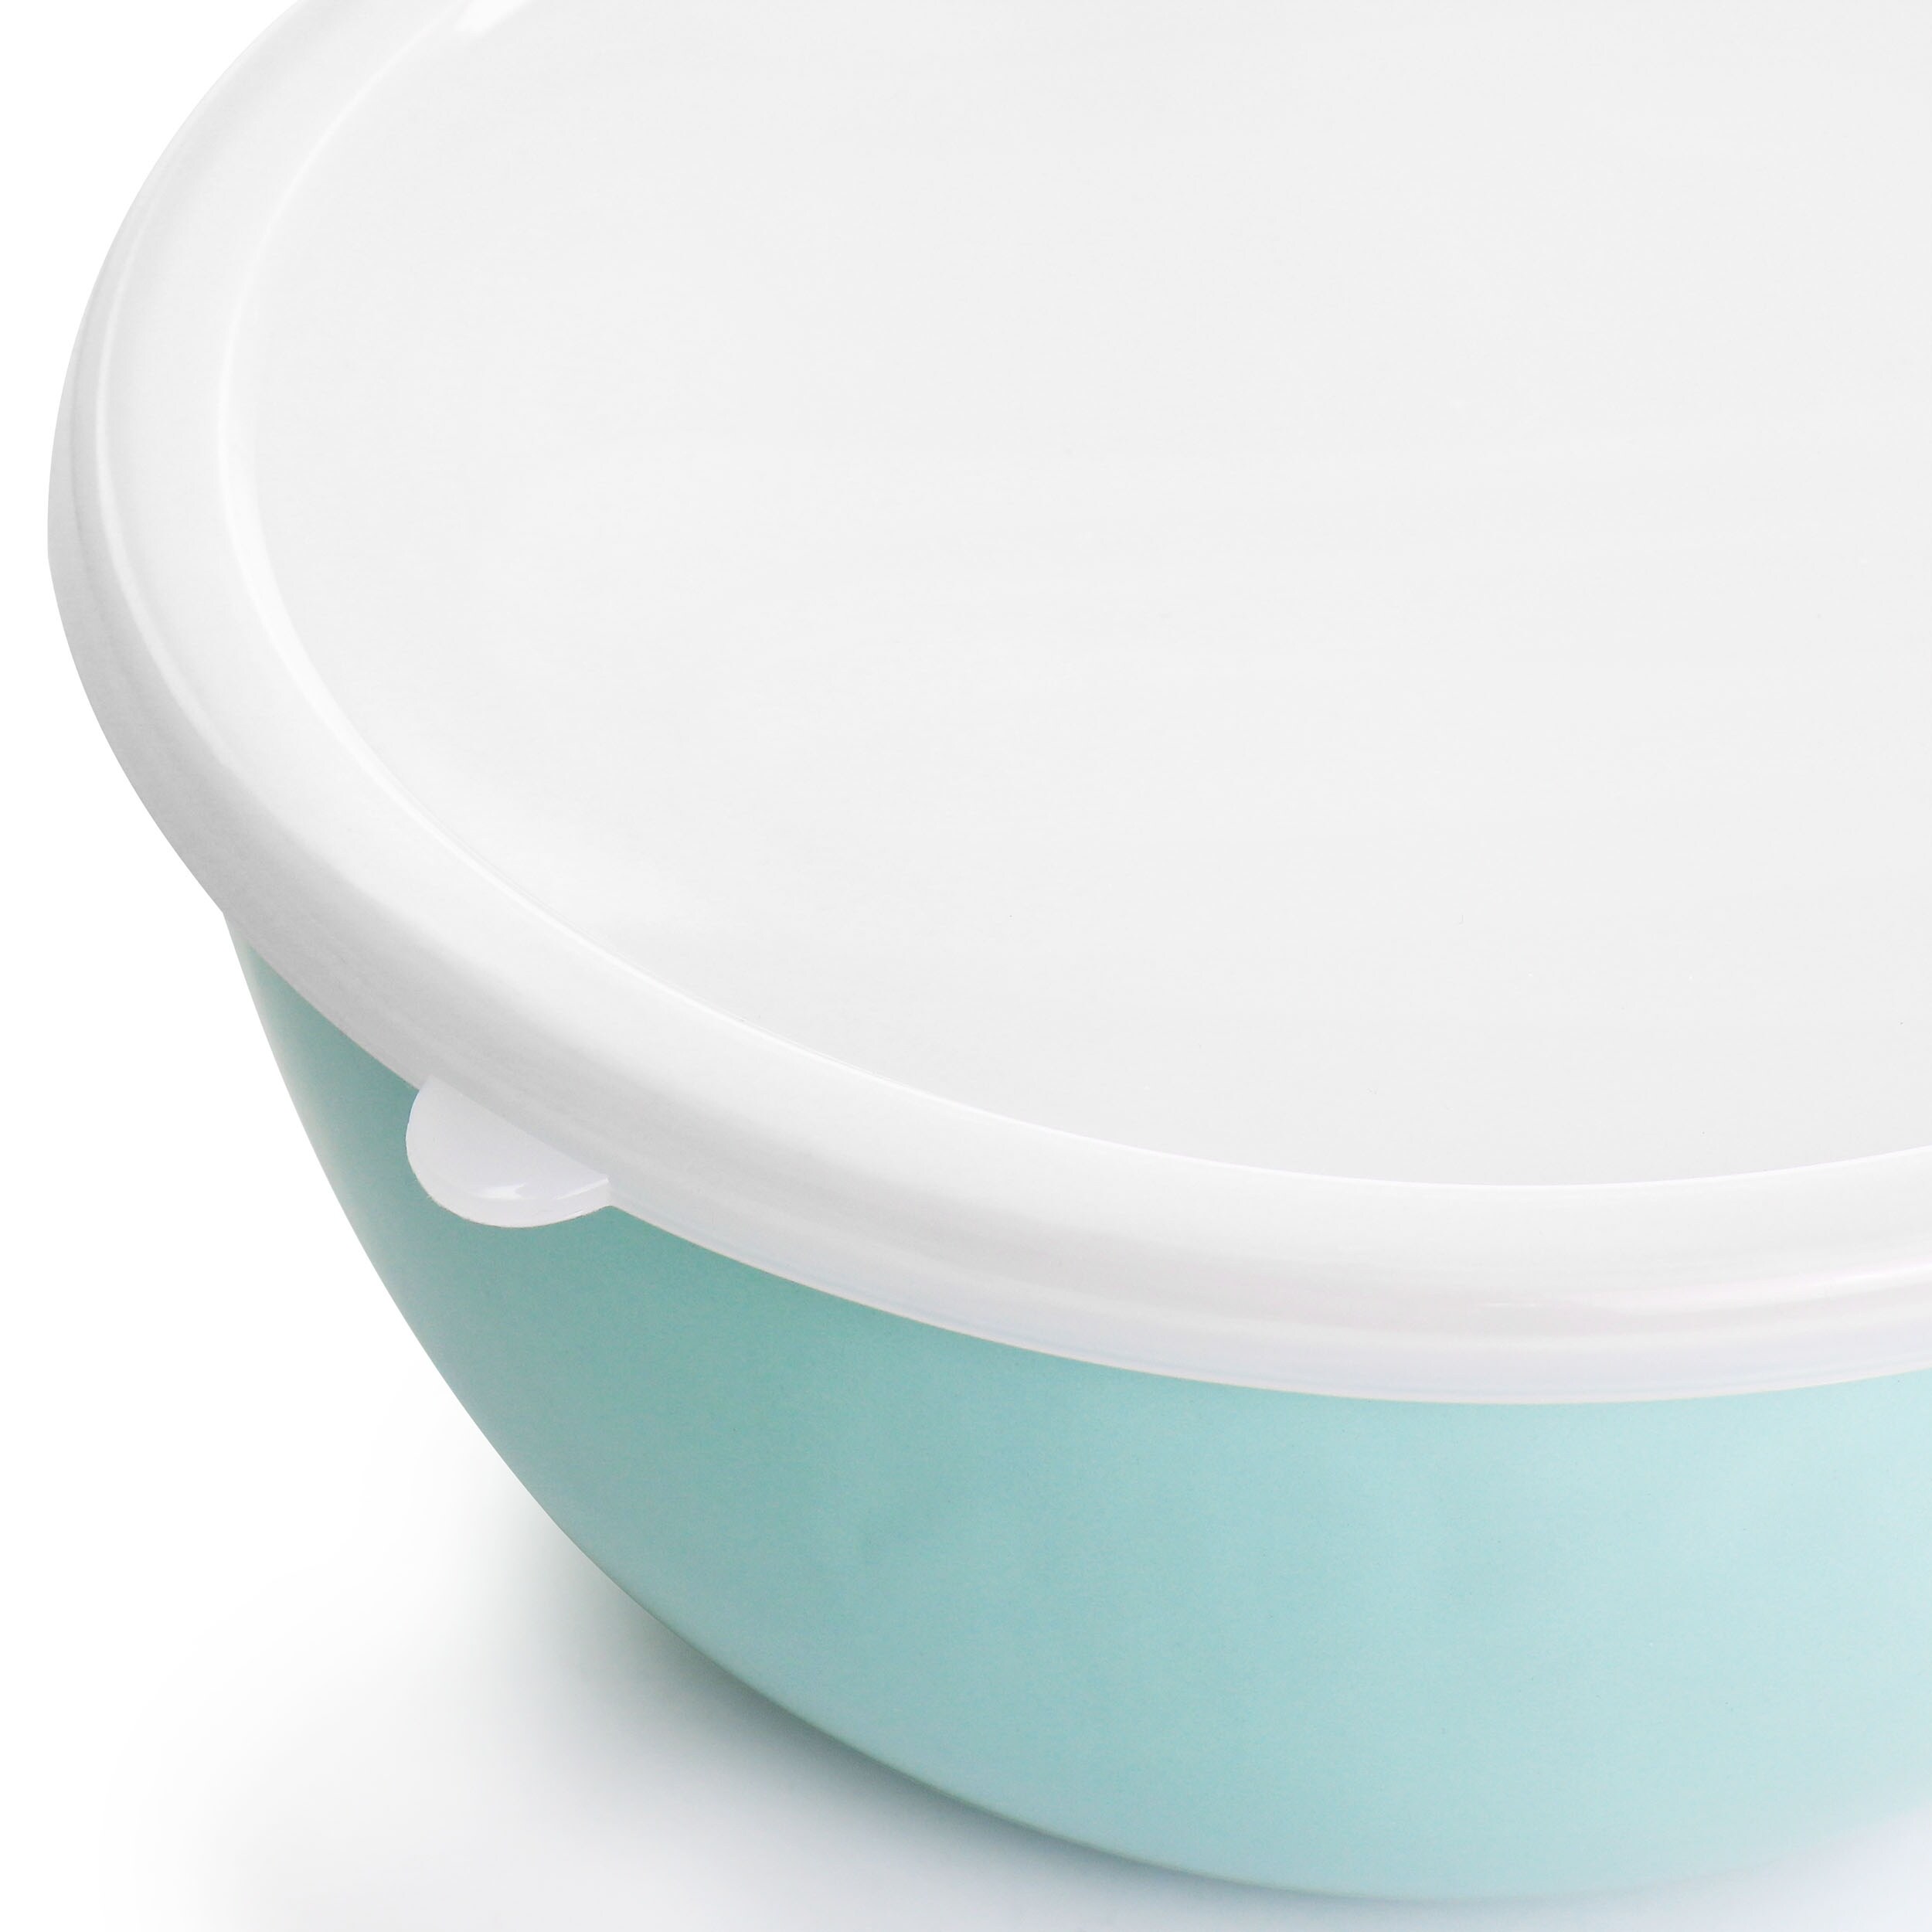 https://ak1.ostkcdn.com/images/products/is/images/direct/f1fe031994b59d2cc2a6693b6829c1c07aed25f9/Martha-Stewart-6-Piece-Enamel-Mixing-Bowl-and-Lid-Set.jpg